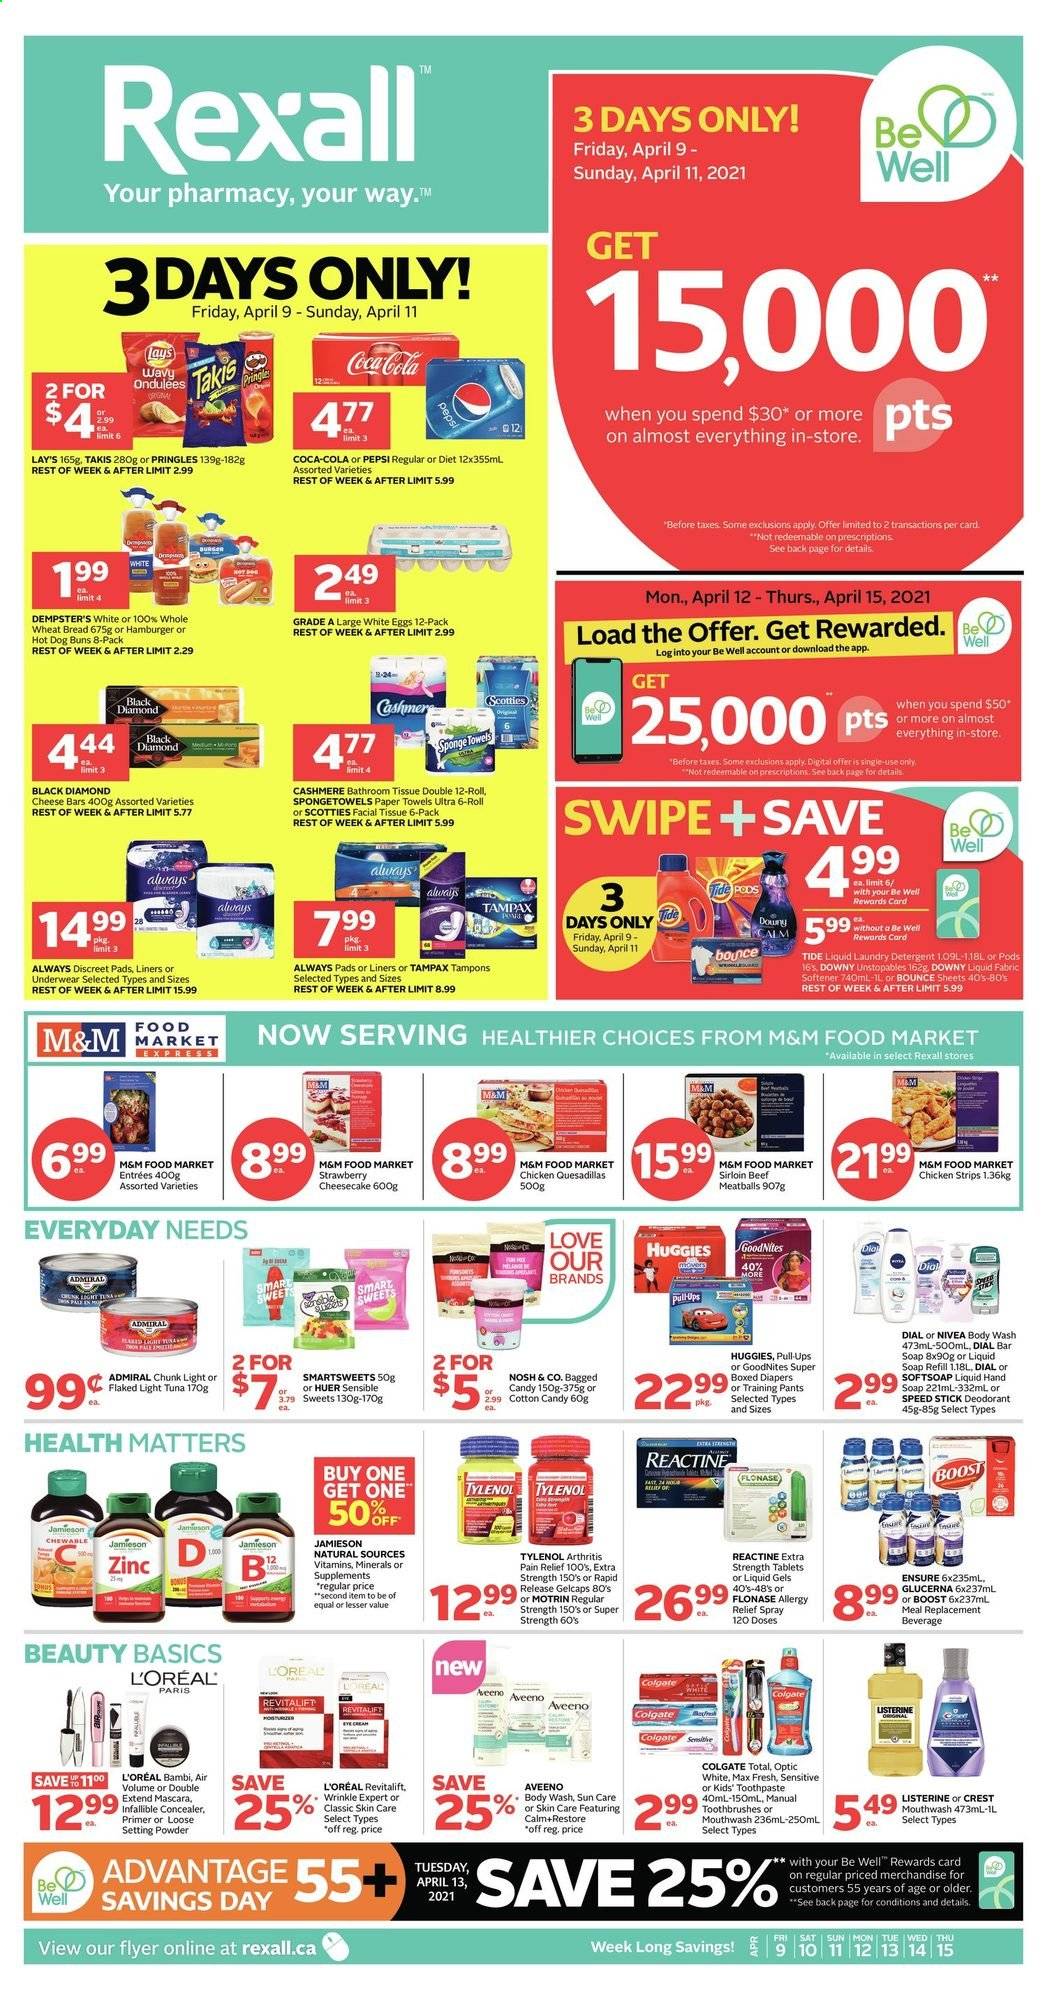 thumbnail - Rexall Flyer - April 09, 2021 - April 15, 2021 - Sales products - cotton candy, Pringles, Lay’s, light tuna, Coca-Cola, Pepsi, Boost, pants, nappies, baby pants, Aveeno, bath tissue, kitchen towels, paper towels, Tide, fabric softener, laundry detergent, Bounce, body wash, Softsoap, hand soap, soap bar, Dial, soap, toothpaste, mouthwash, Crest, Always pads, sanitary pads, Always Discreet, tampons, L’Oréal, anti-perspirant, Speed Stick, corrector, face powder, sponge, pain relief, Tylenol, Glucerna, zinc, allergy relief, Motrin, Listerine, mascara, Tampax, tuna, Huggies, Nivea, M&M's, deodorant. Page 1.